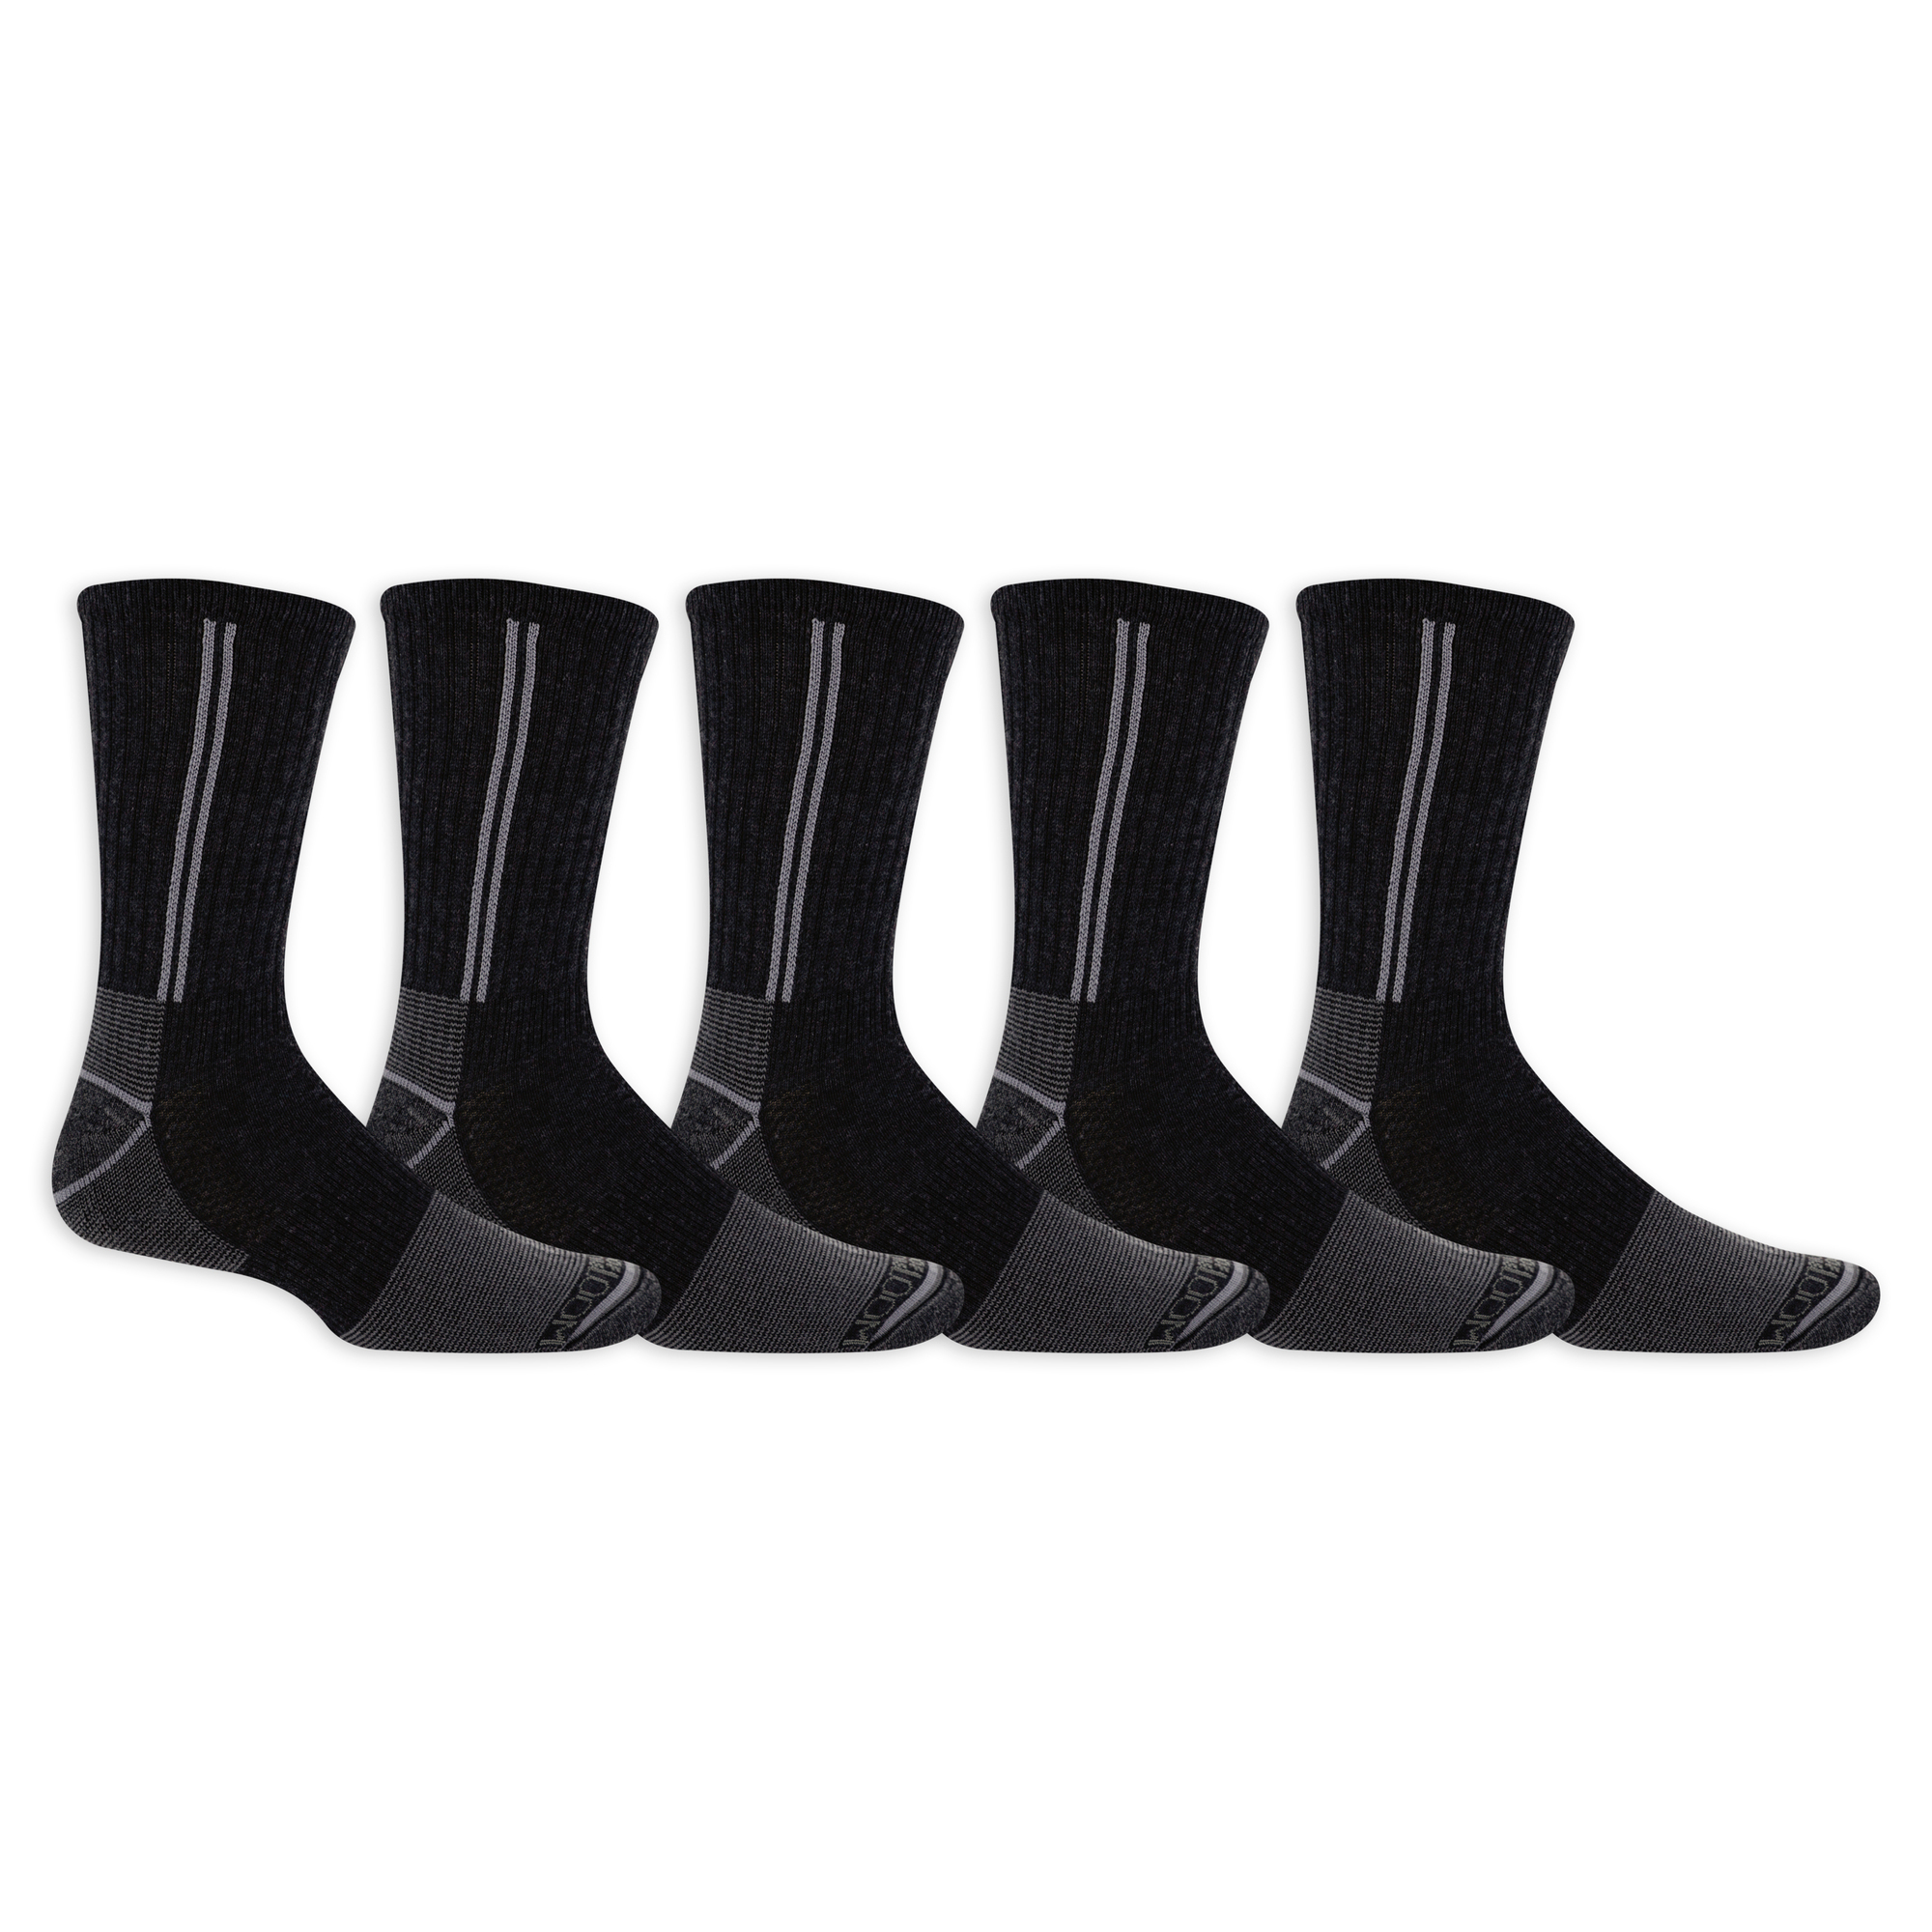 Fruit of the Loom, MENS WORK GEAR CREW SOCK 5 PAIR PACK, Size M, Pairs (qty.) 5, Color Black, Model FRM10542C